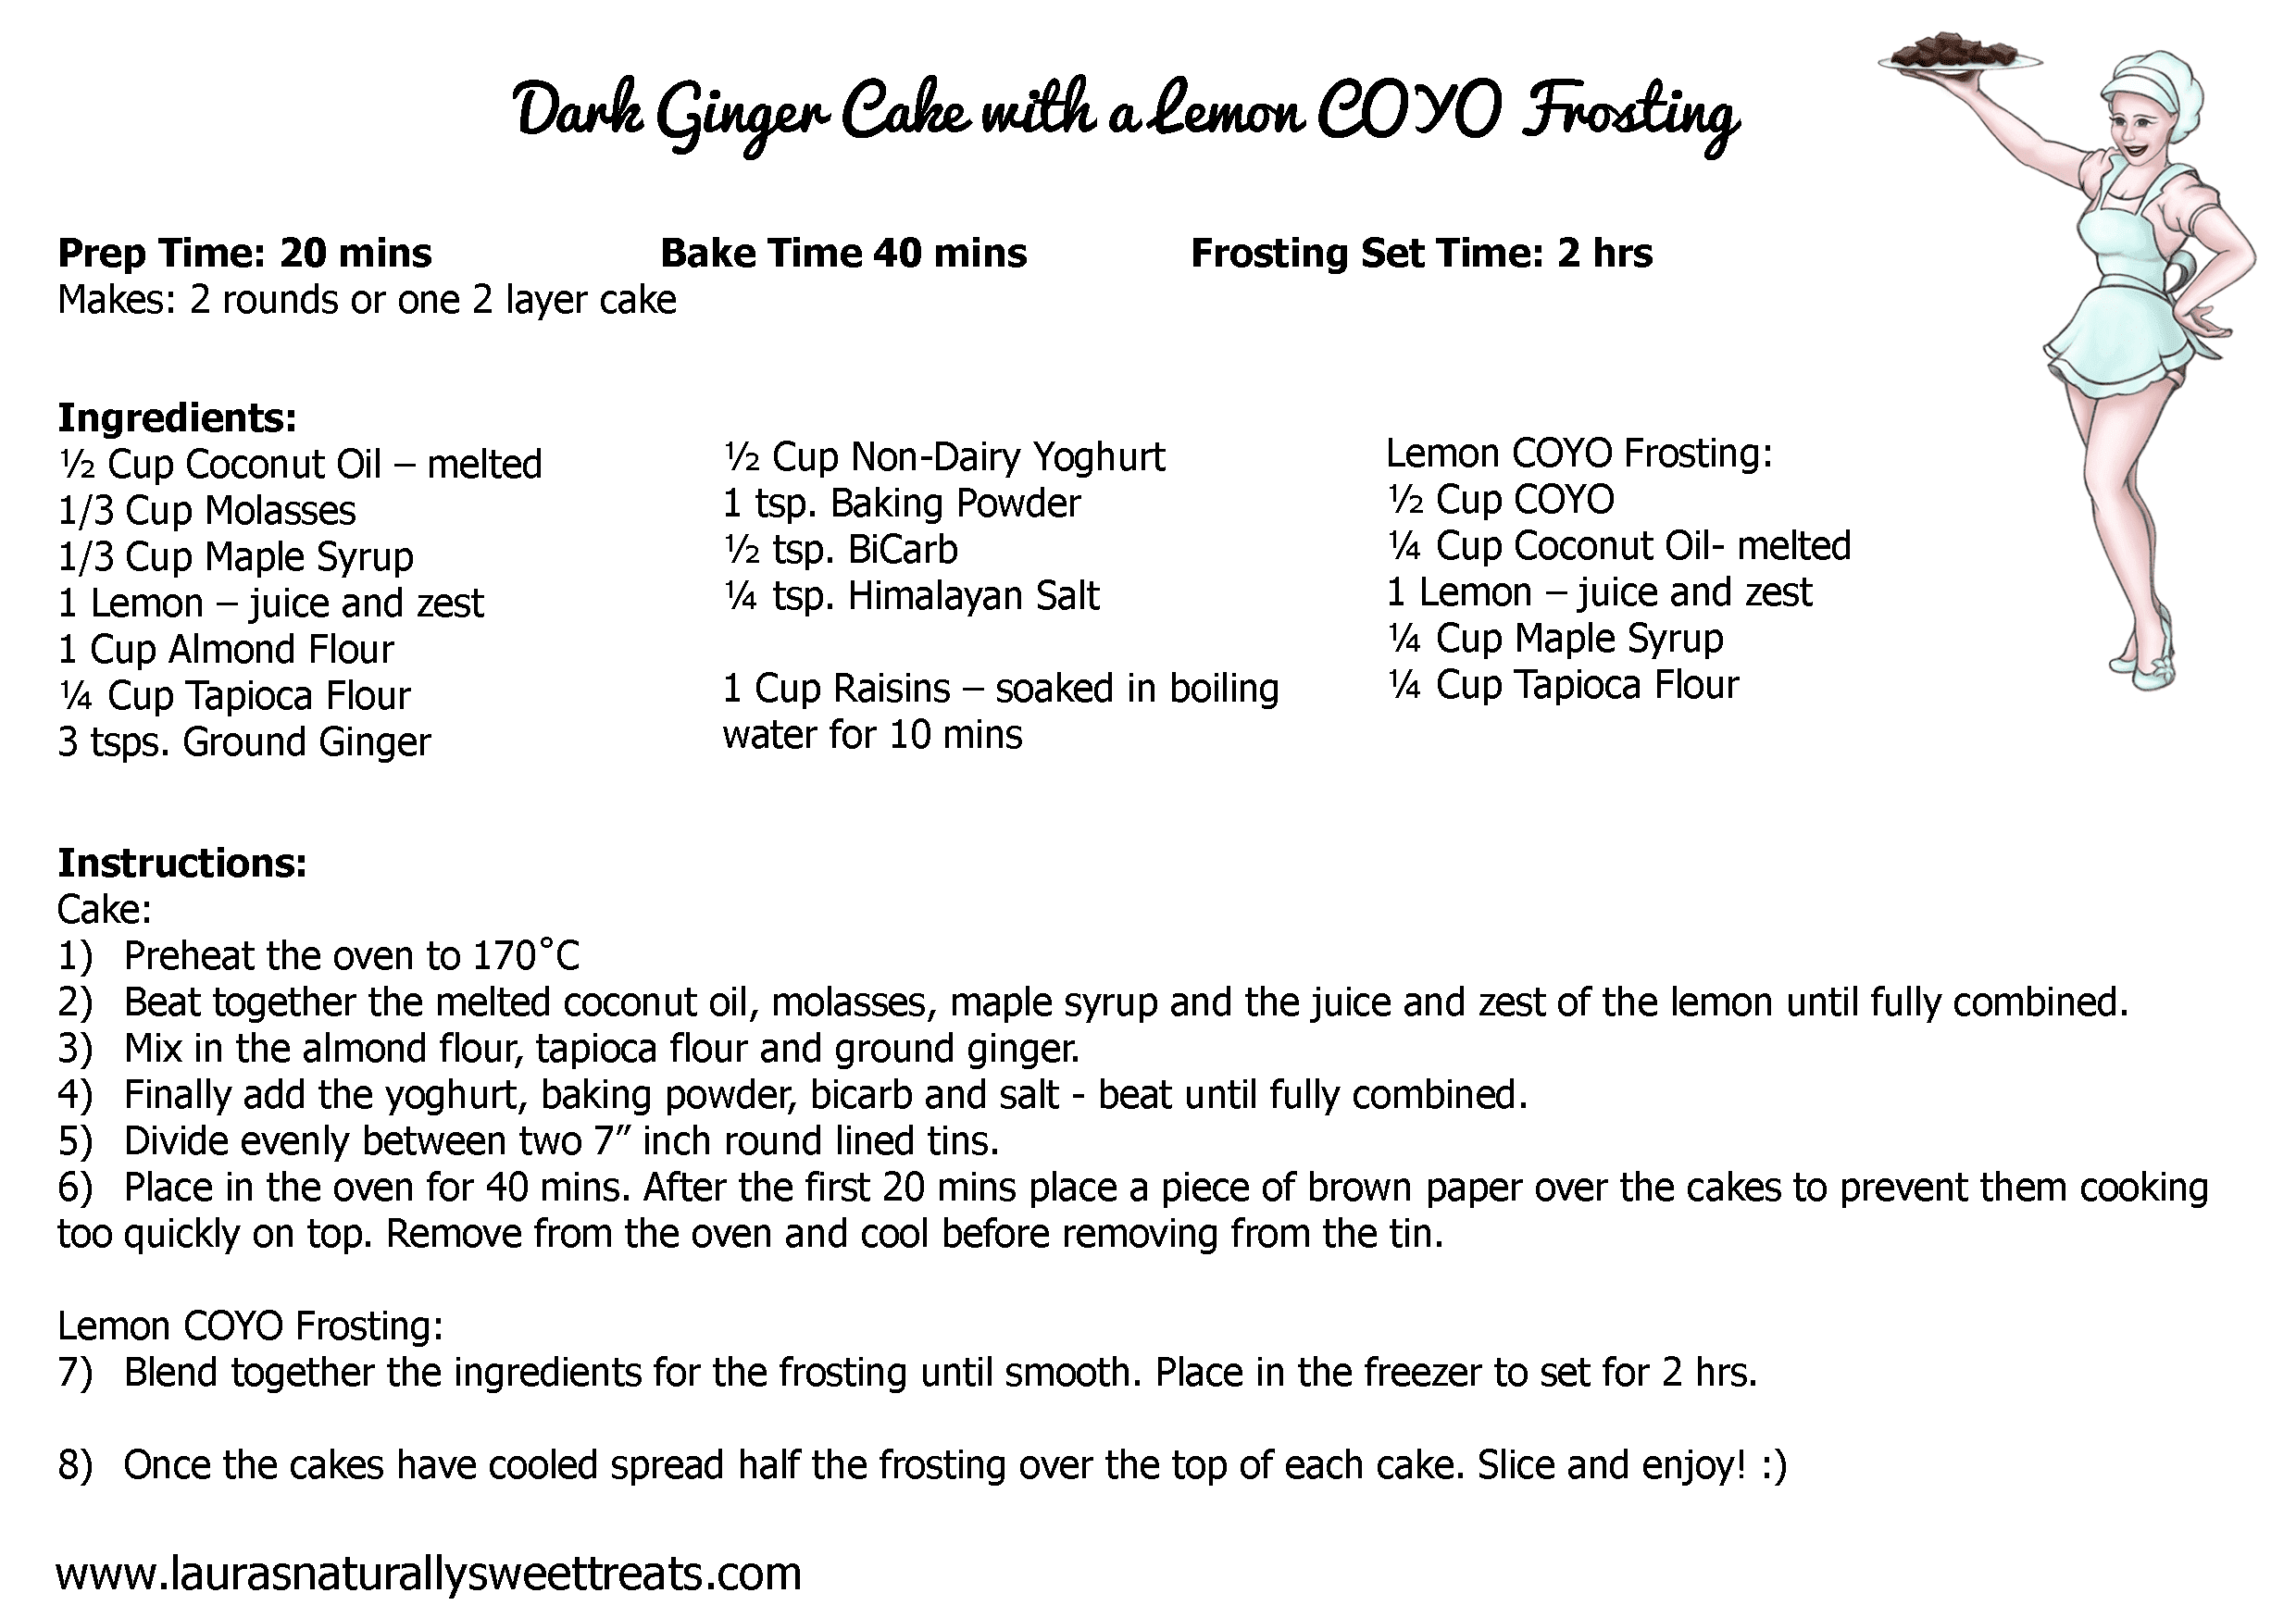 dark ginger cake with a lemon coyo frosting recipe card